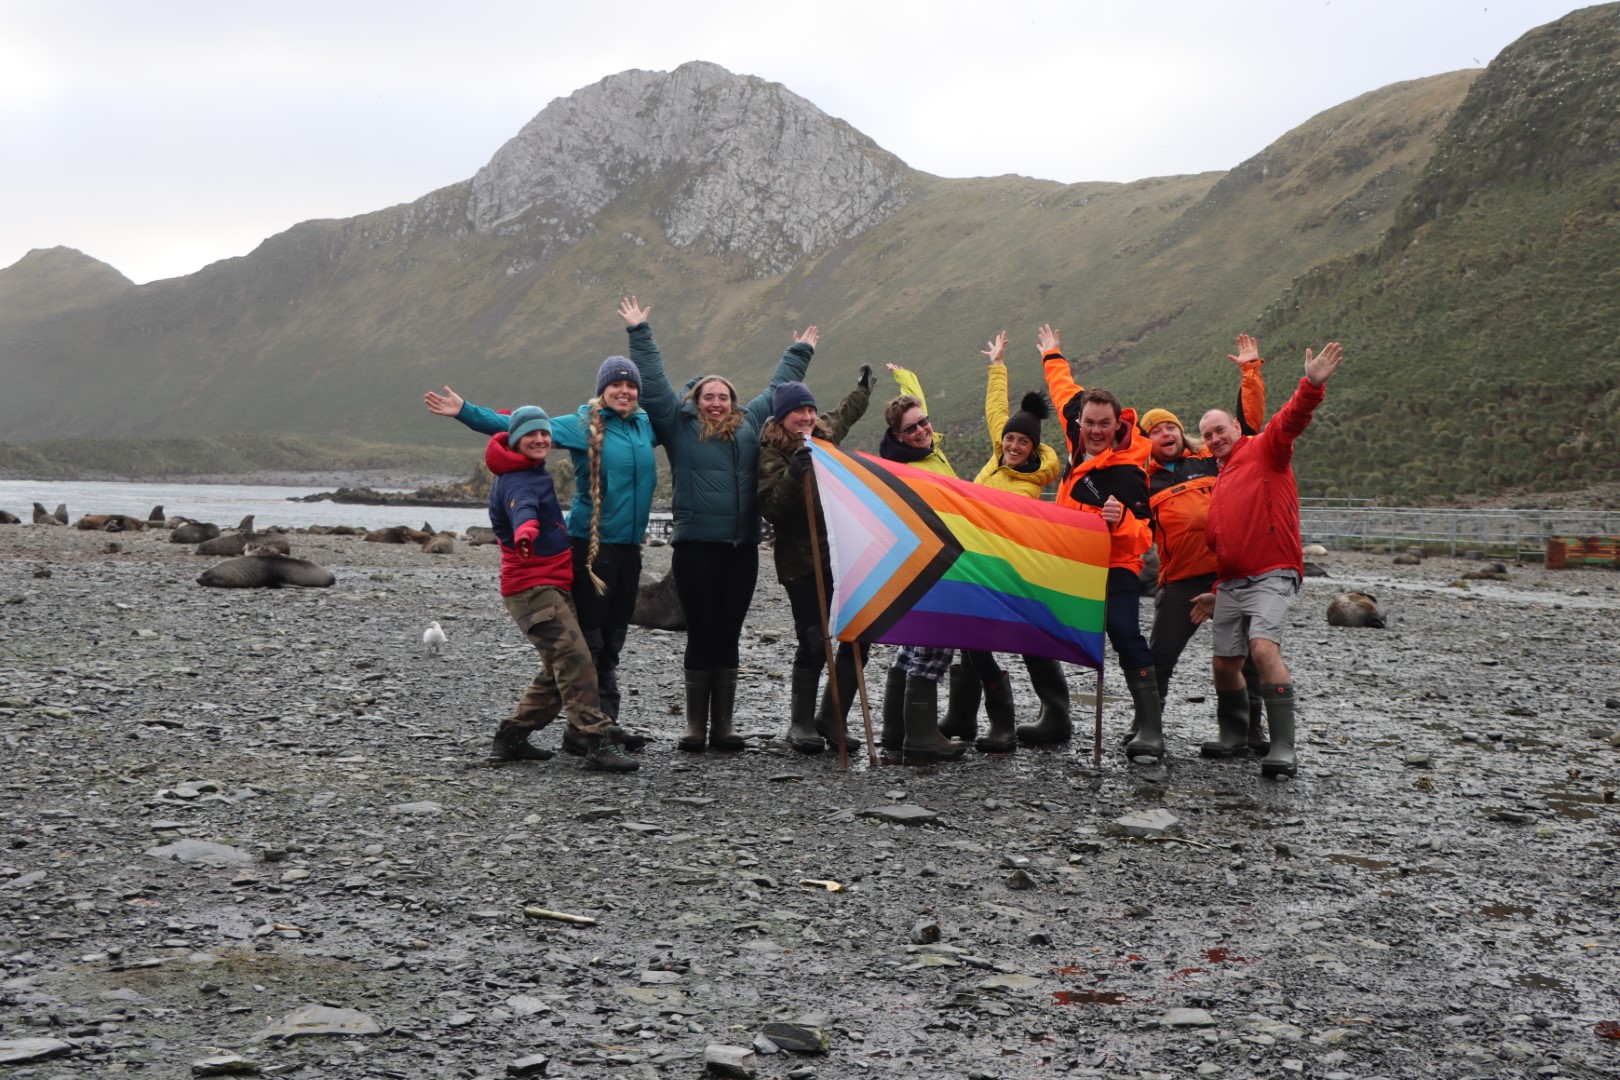 A group of 9 people stand on a stony beach holding a Pride flag. There are green peaks in the background.